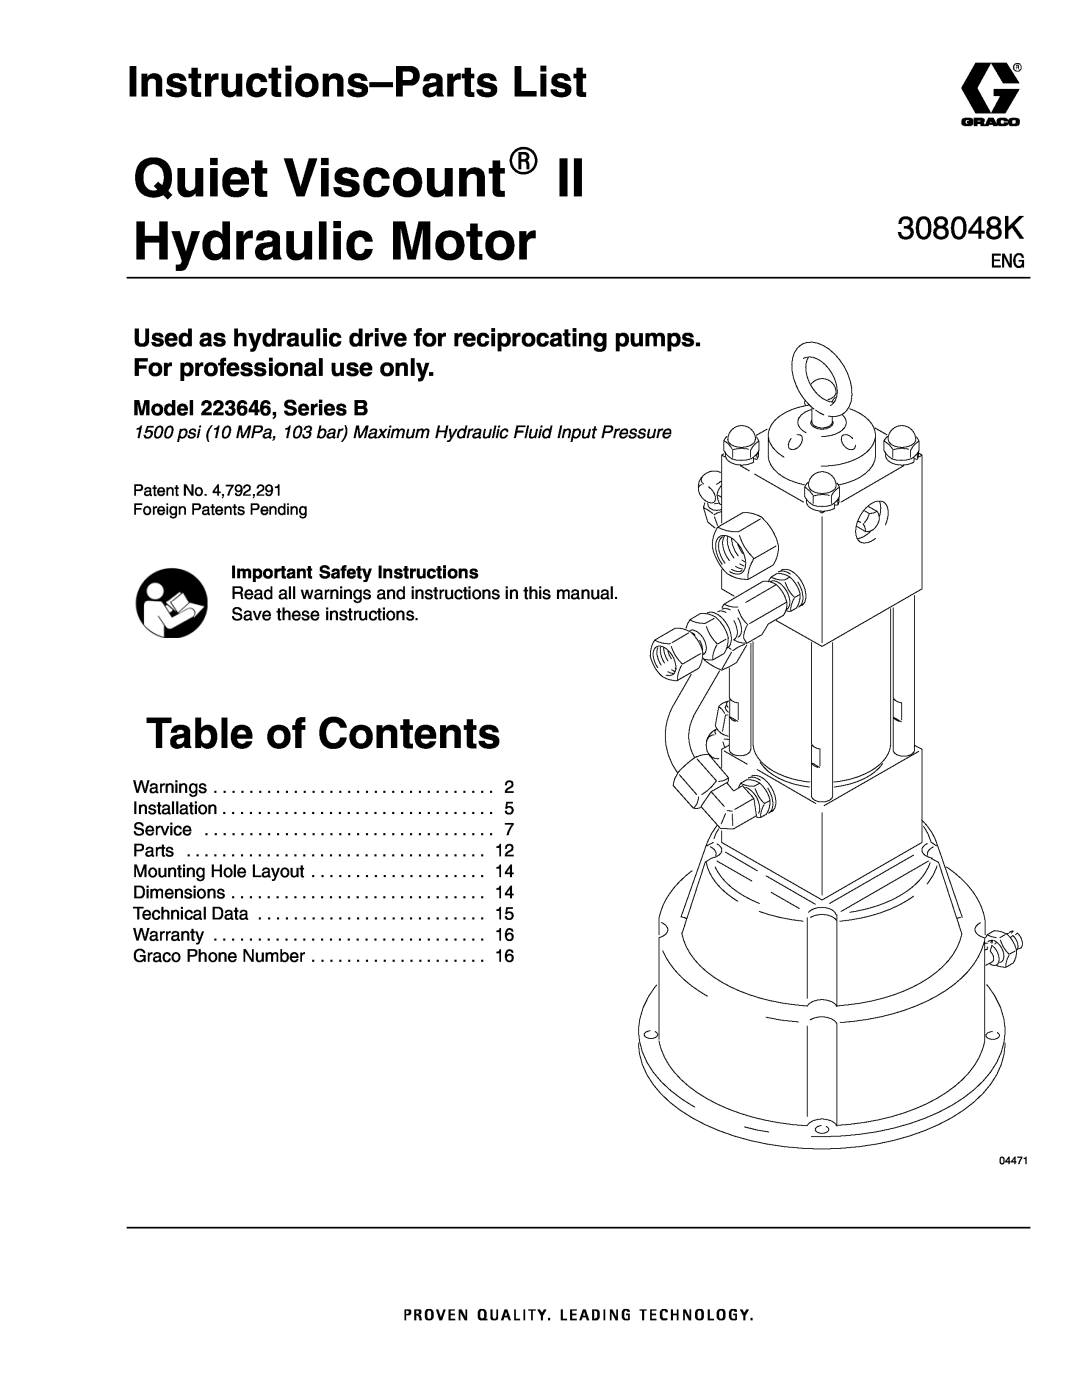 Graco important safety instructions Instructions-Parts List, Table of Contents, Model 223646, Series B, 308048K, 04471 